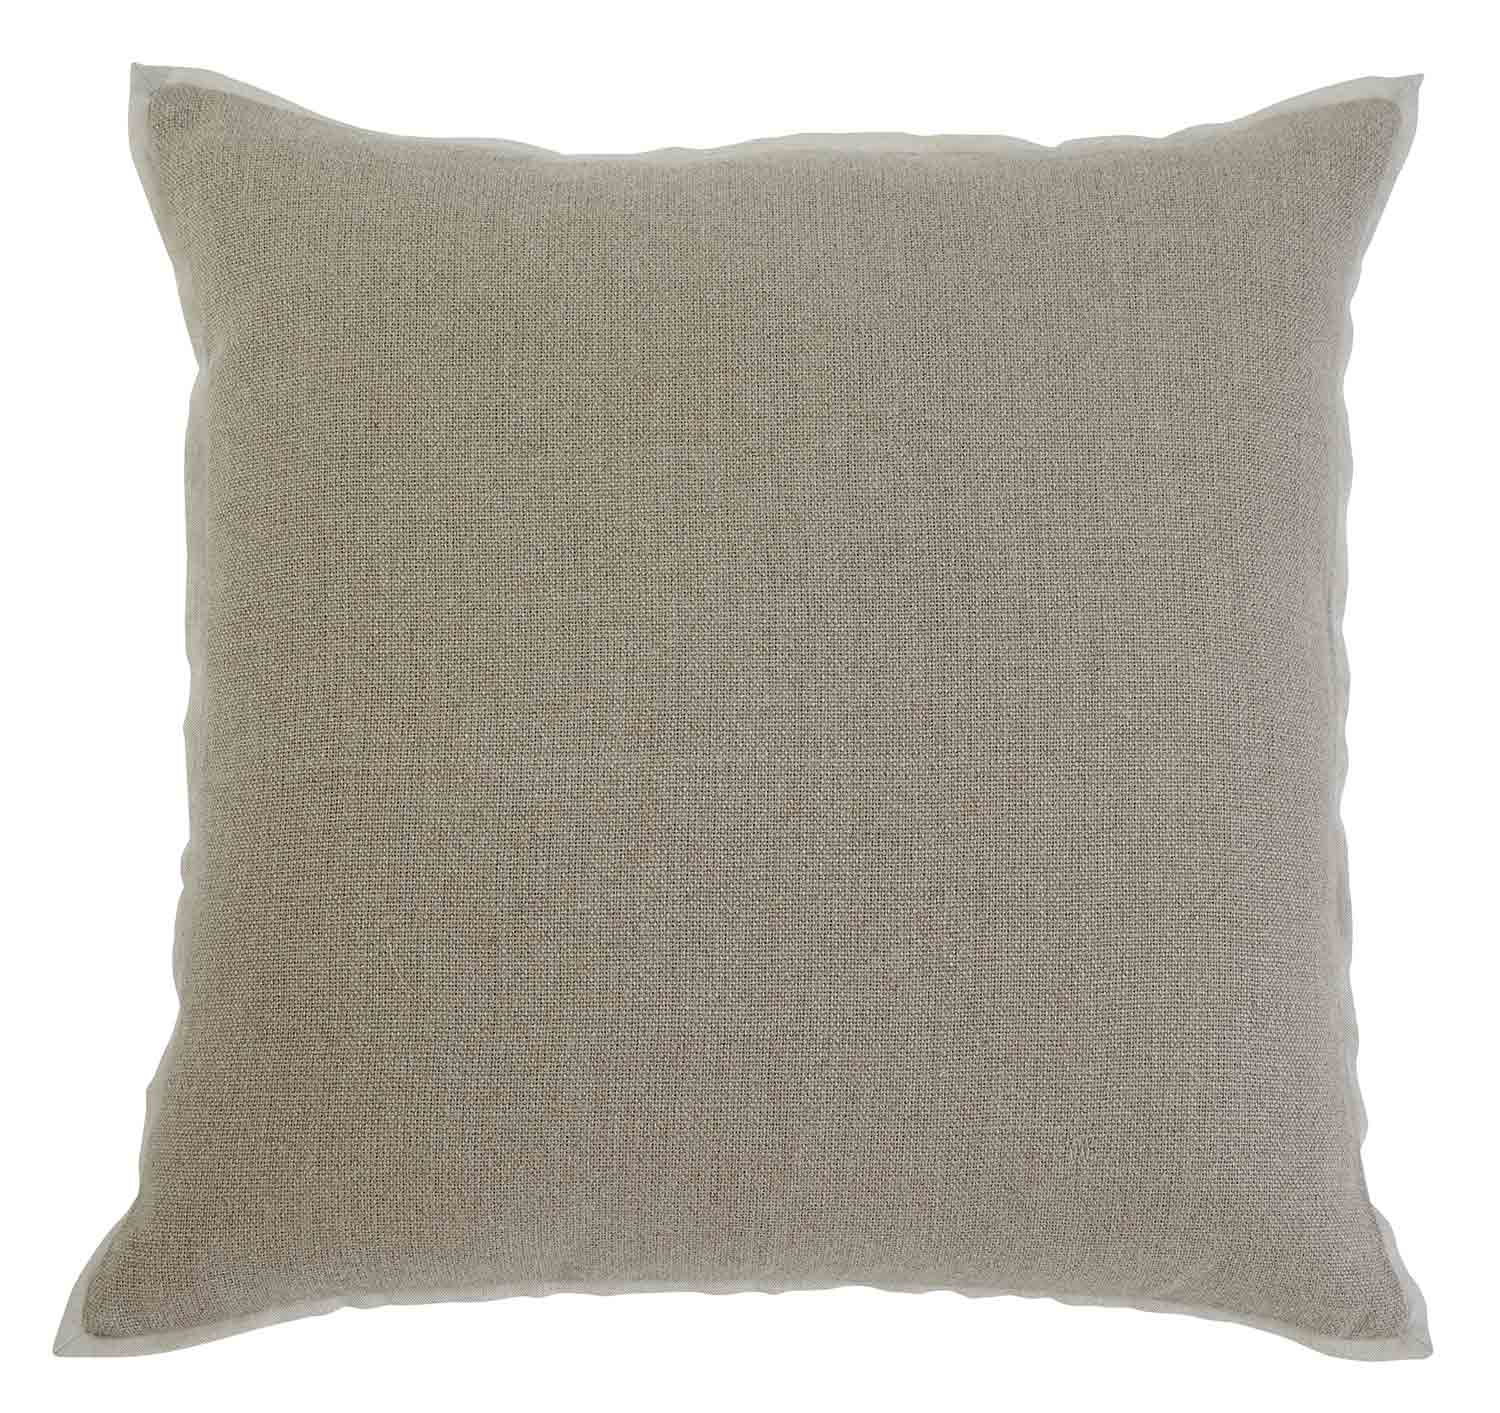 Ashley Solid Pillow Cover - Set of 4 - Khaki